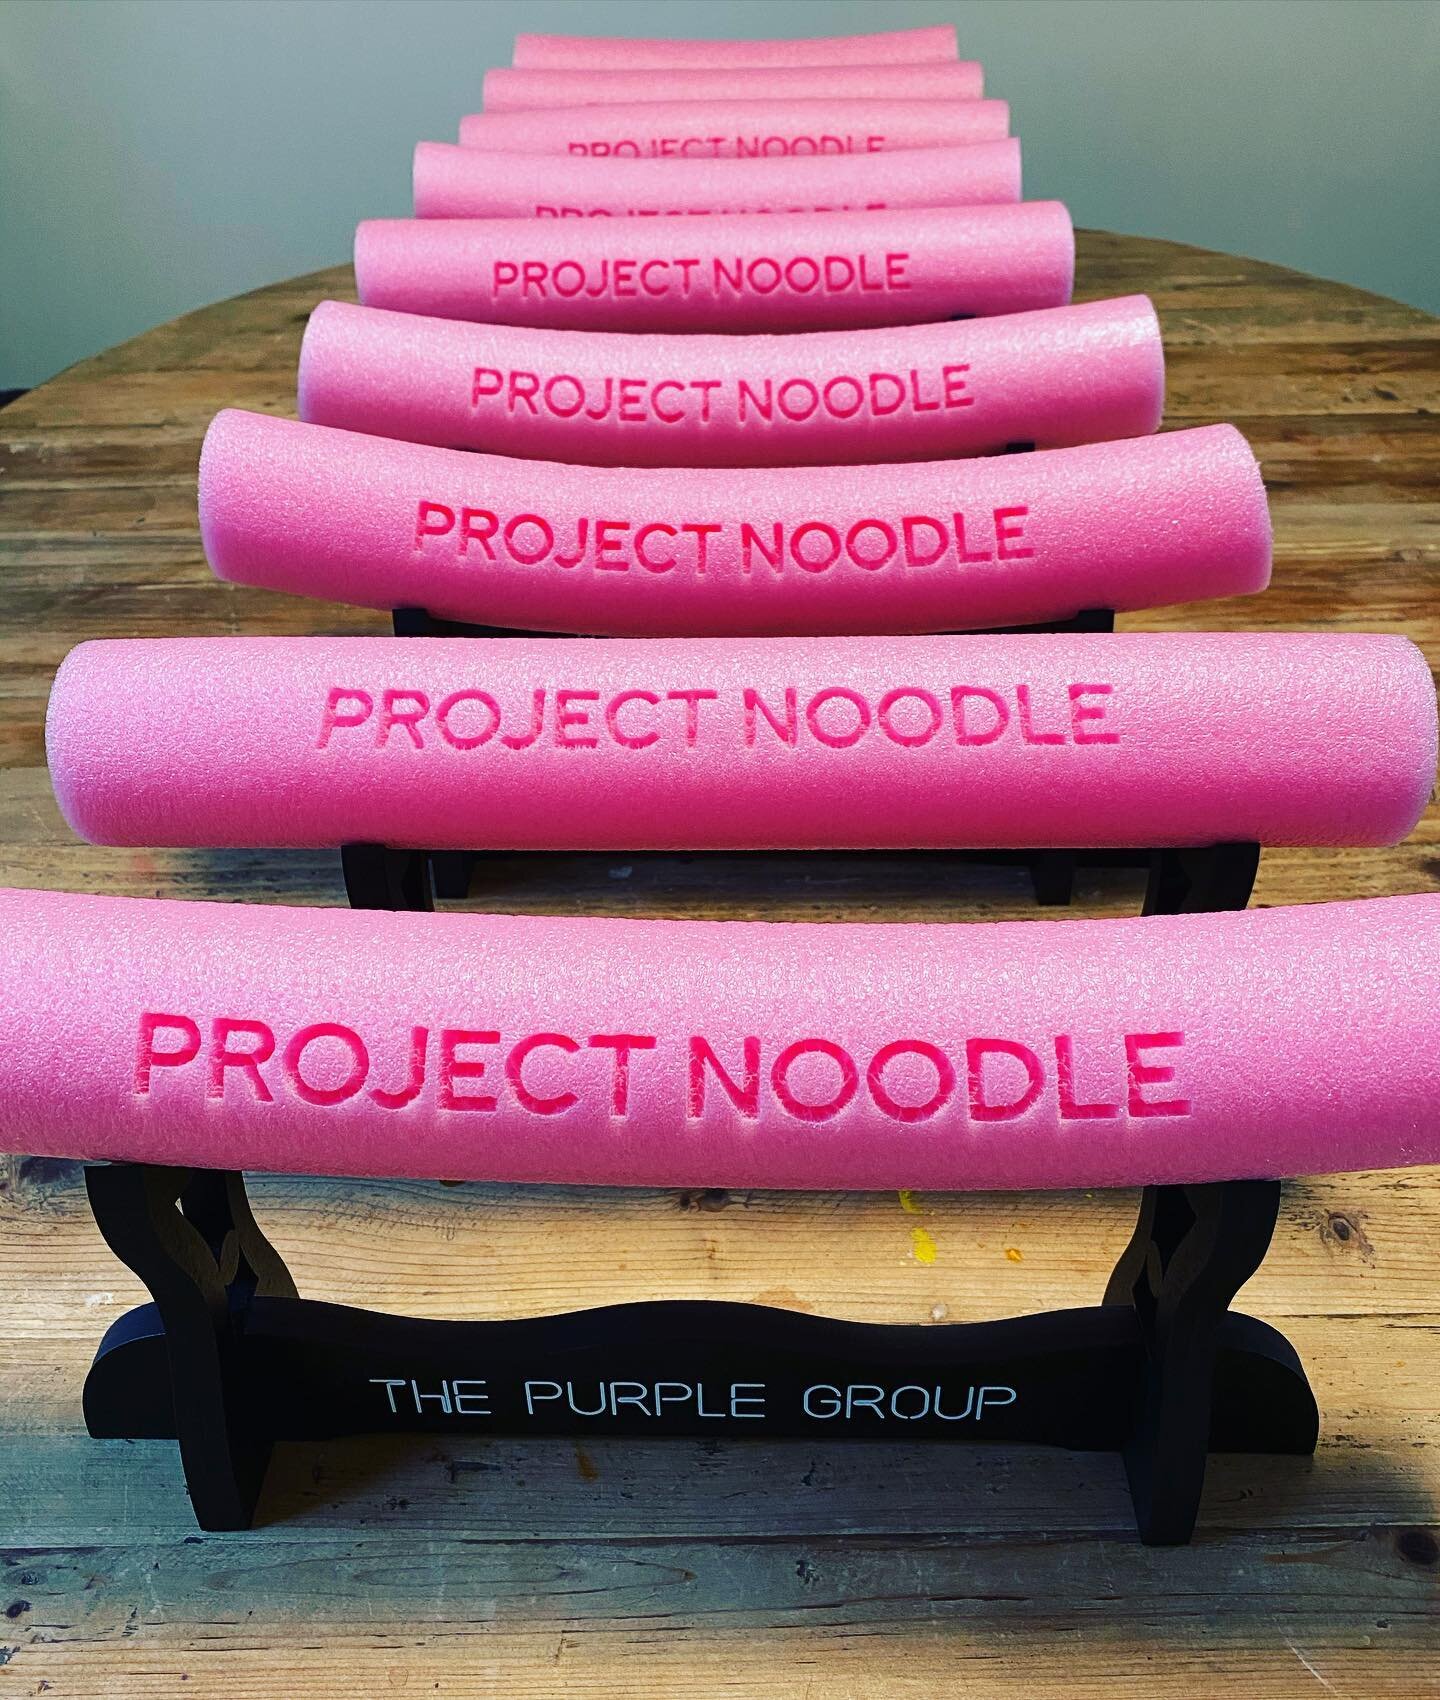 Easter eggs are a real love of ours and not JUST the chocolatey kind, but the props we put into our films.

Any ideas what on earth @cussbird was thinking, when he put foam noodle trophies on custom made samurai sword stands? Or when he then designed